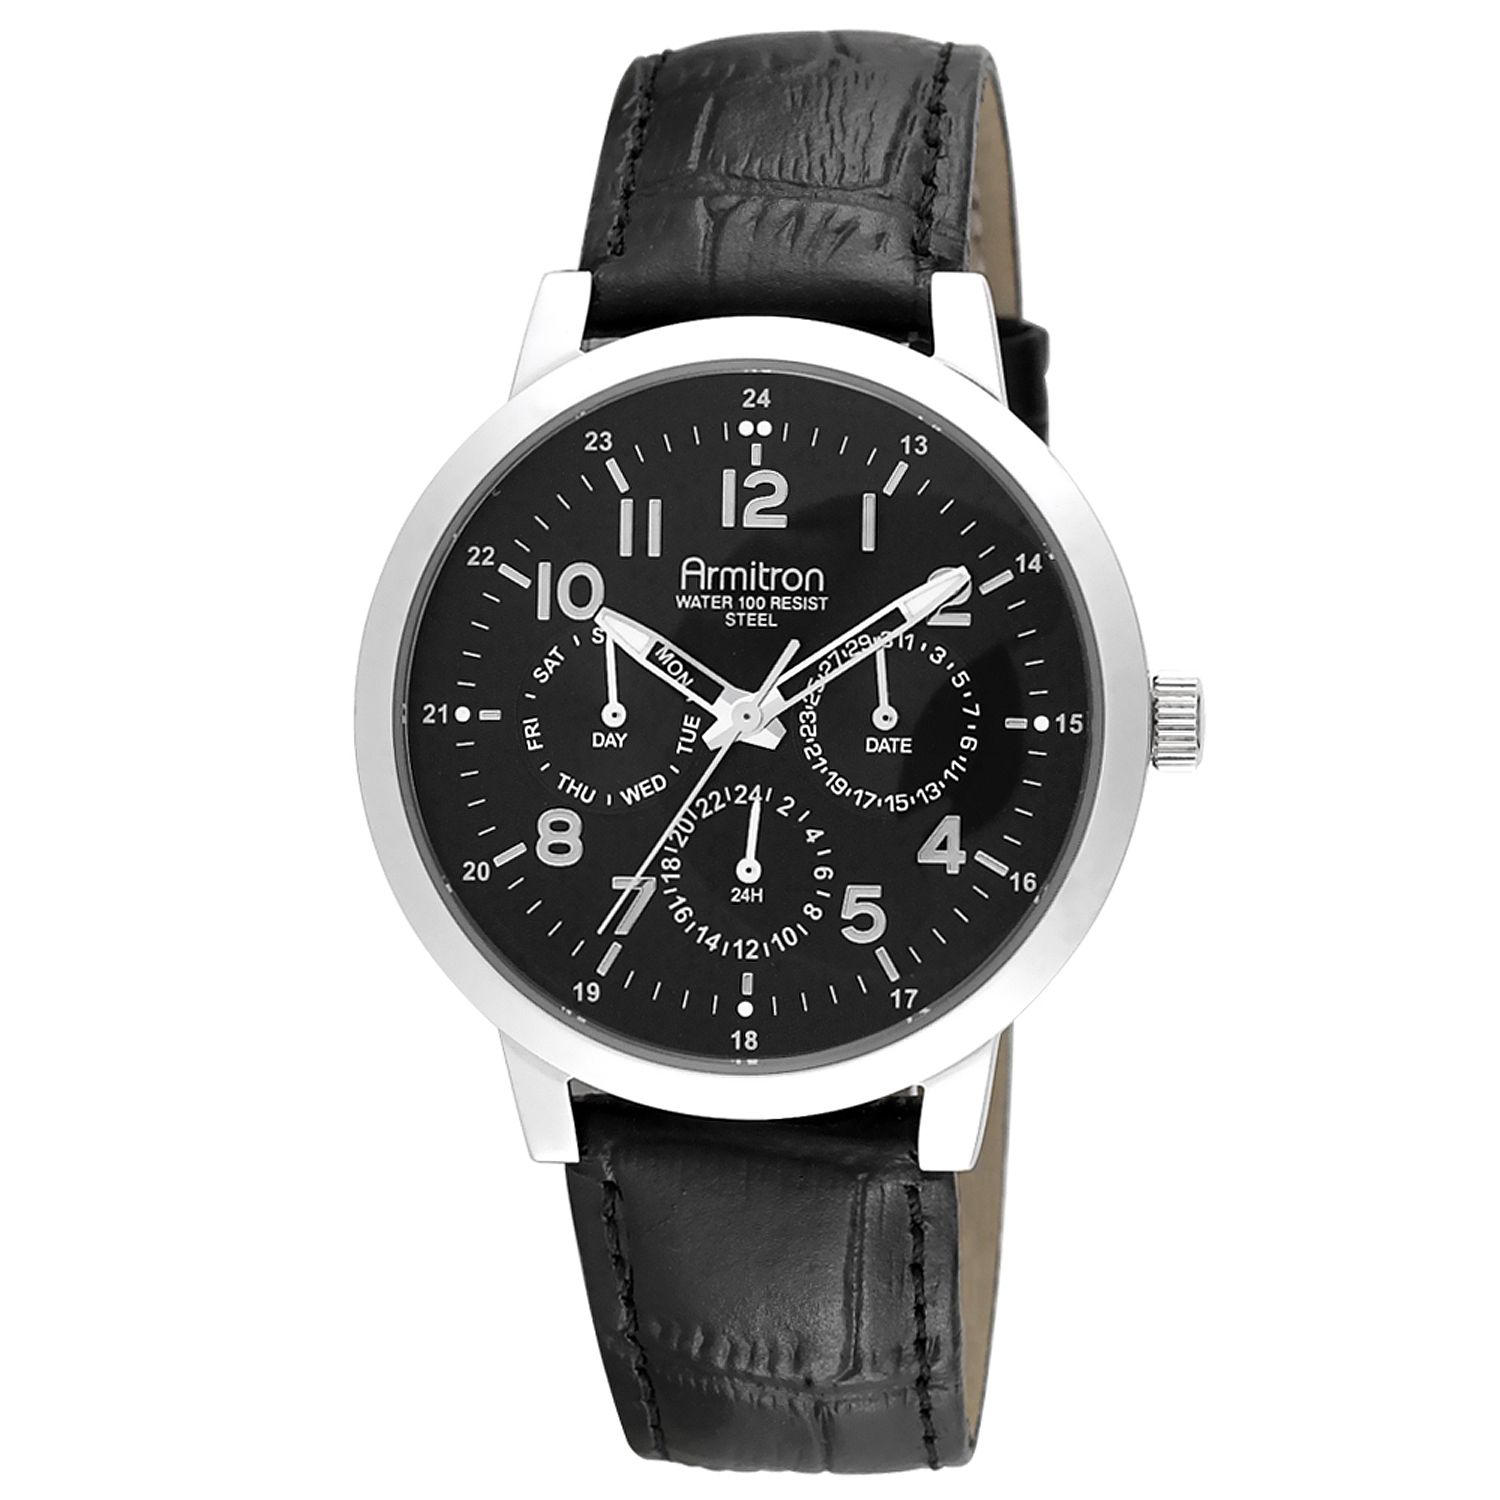 Mens Gents Calendar Day/Date Watch w/Round ST Case, Black Multi-Display Dial and Leather Band